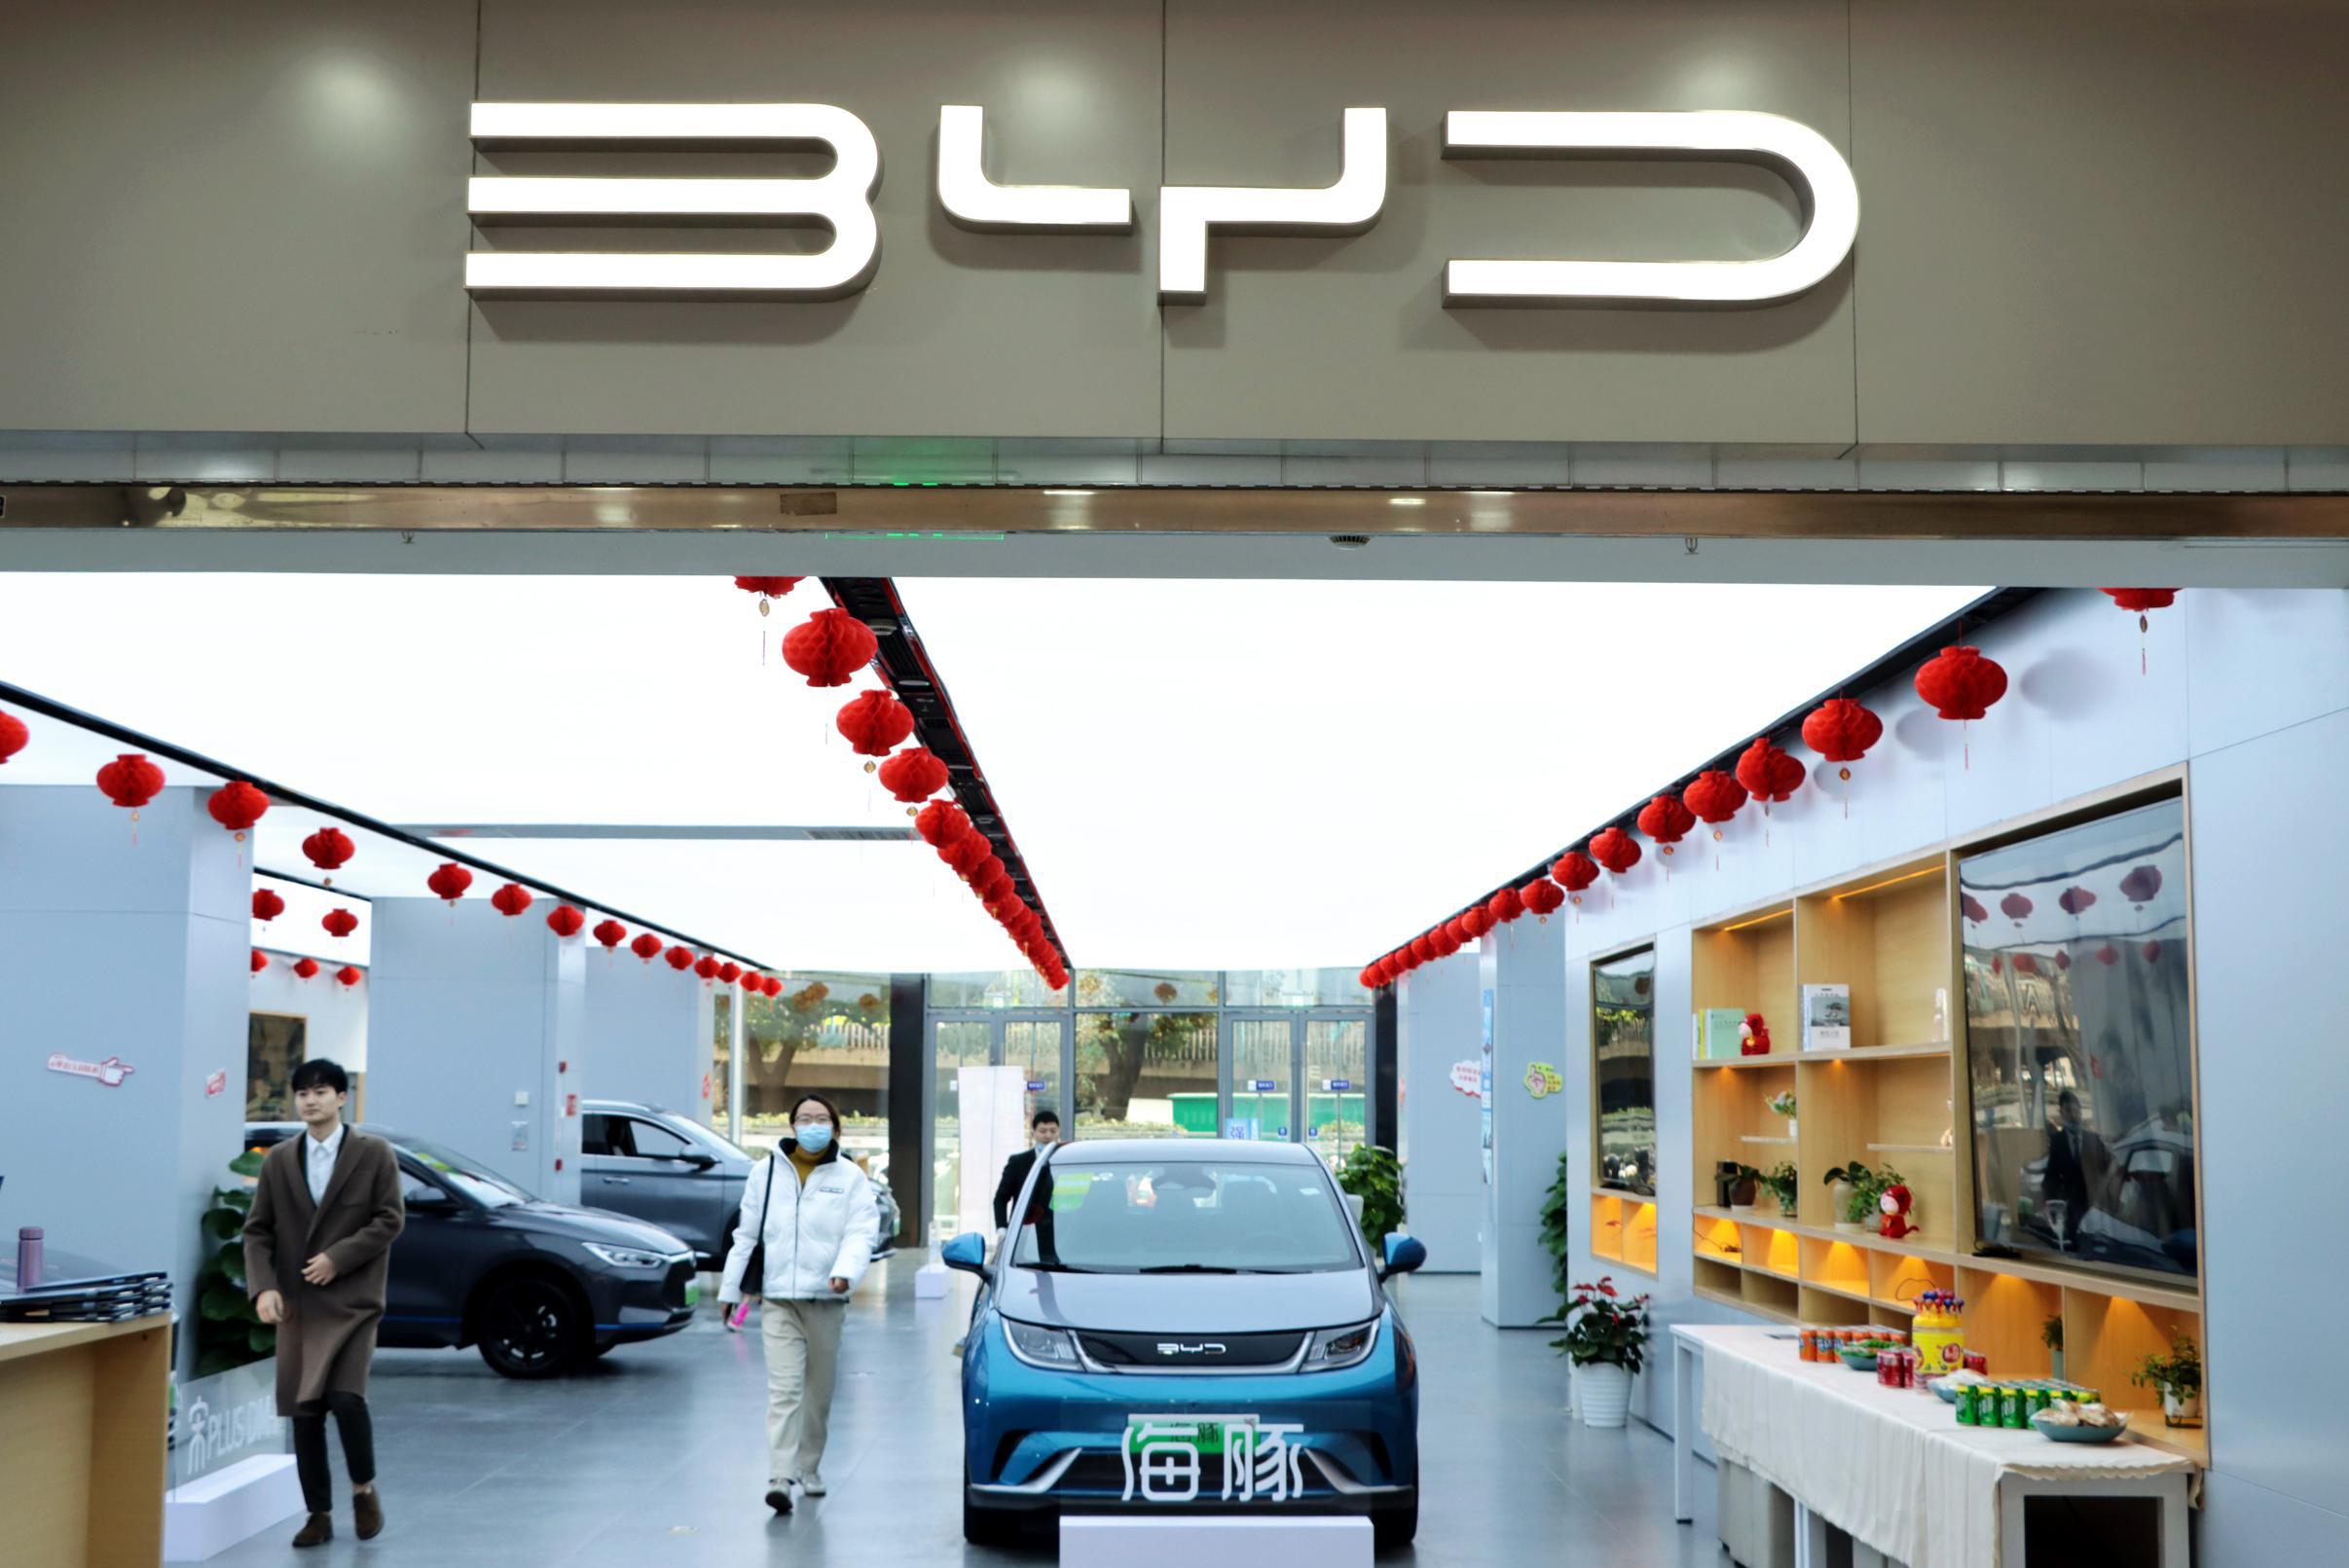 Car rental company Sixt buys 100,000 electric cars from Chinese manufacturer